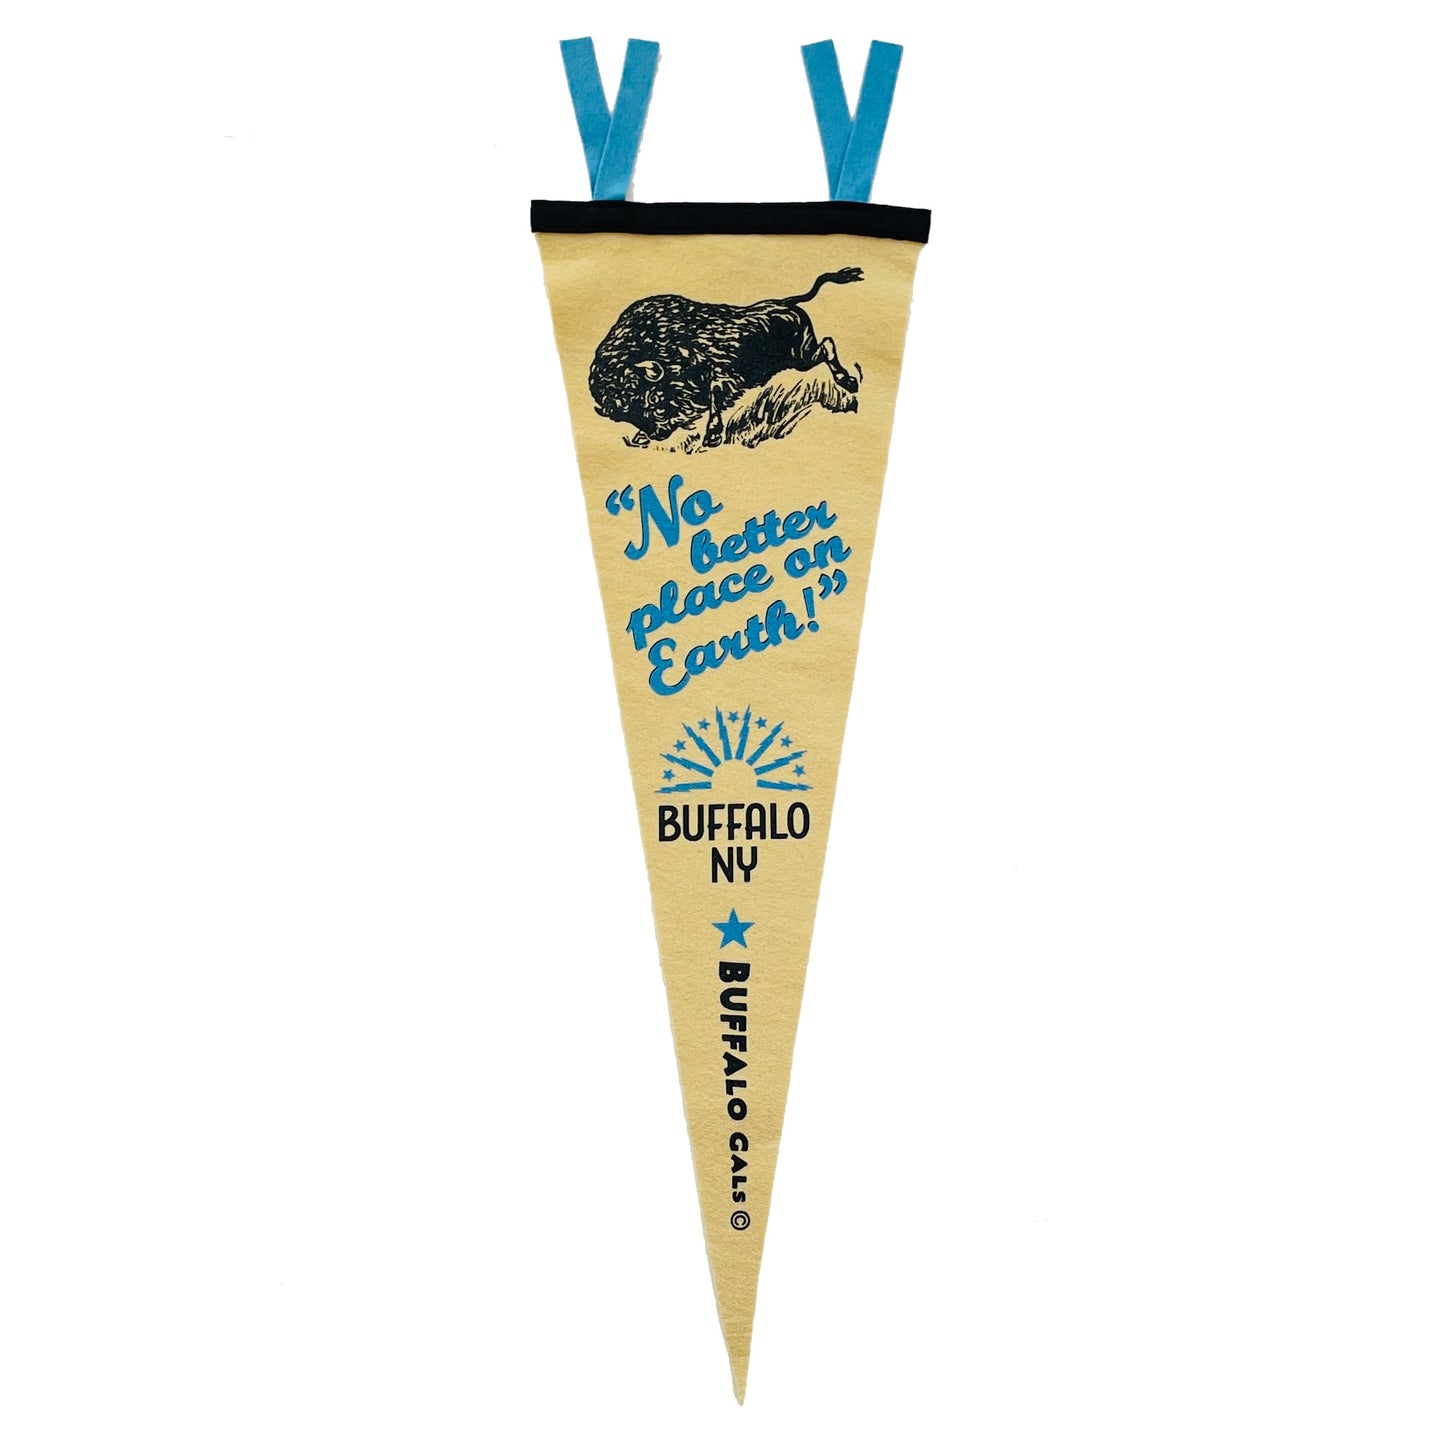 “Buffalo: No Better Place on Earth!™” pennant